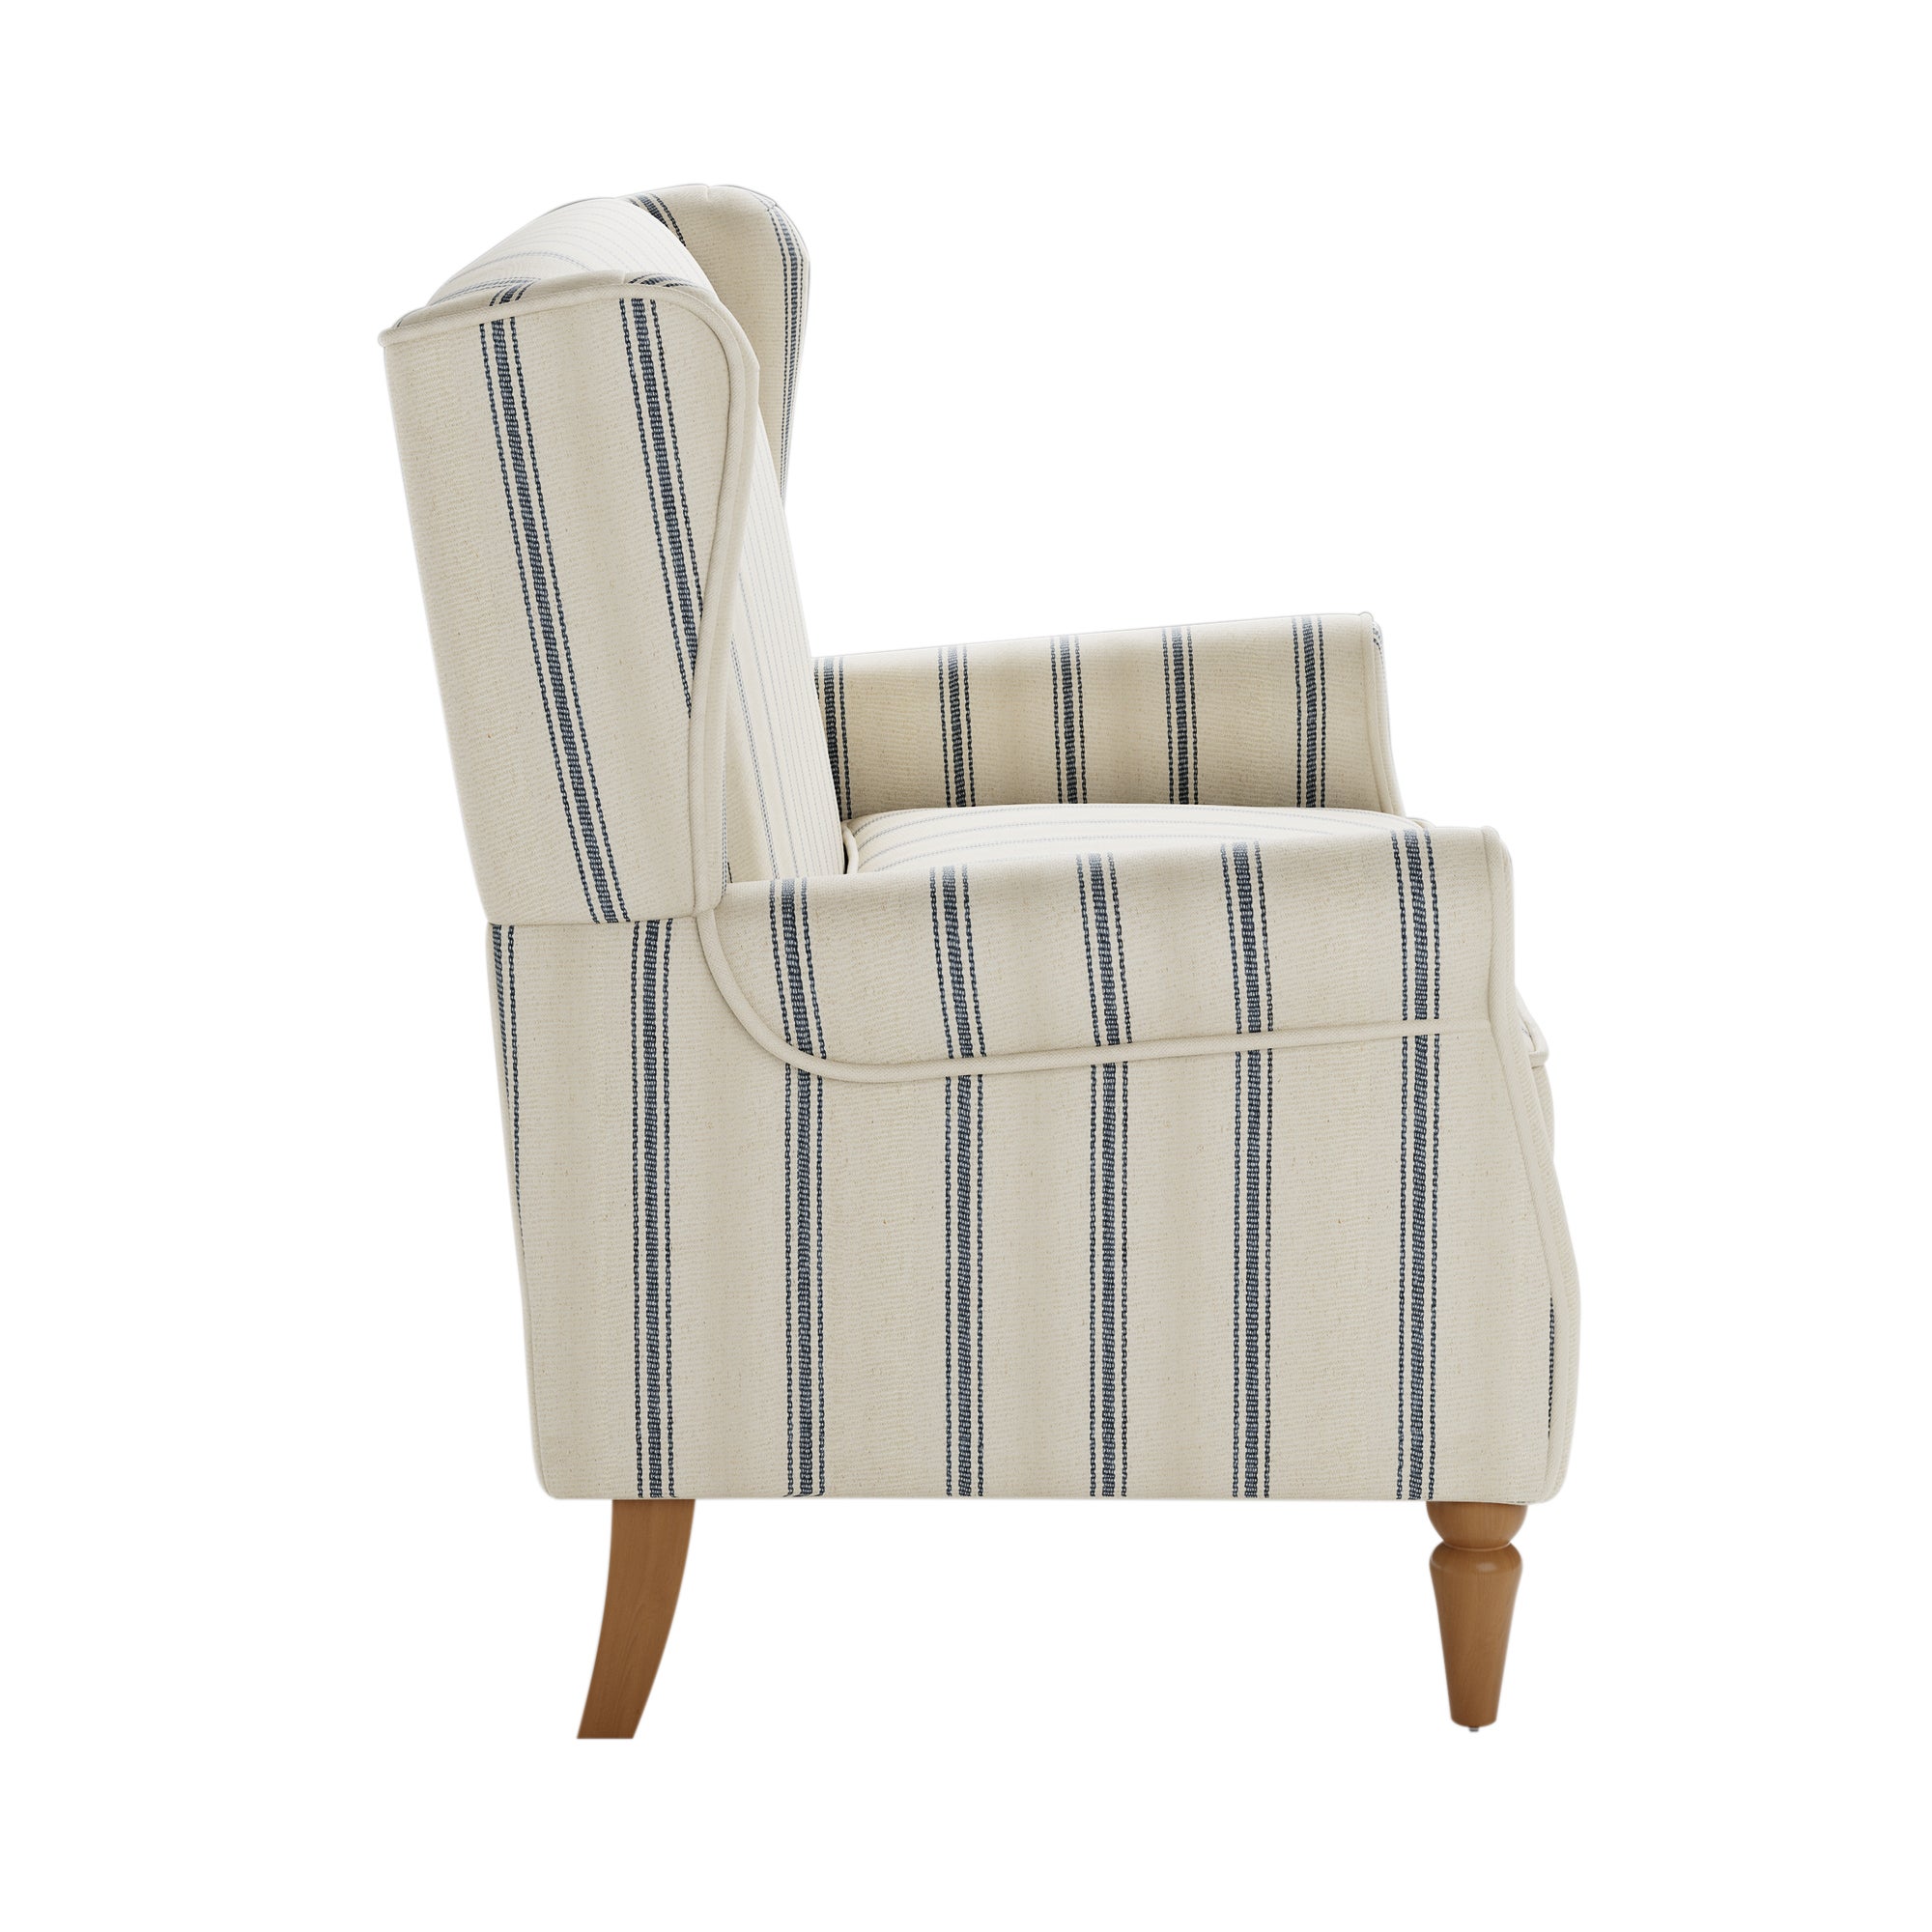 Oswald Self Assembly Pinstripe Compact 2 Seater Folkstone Blue | Dunelm